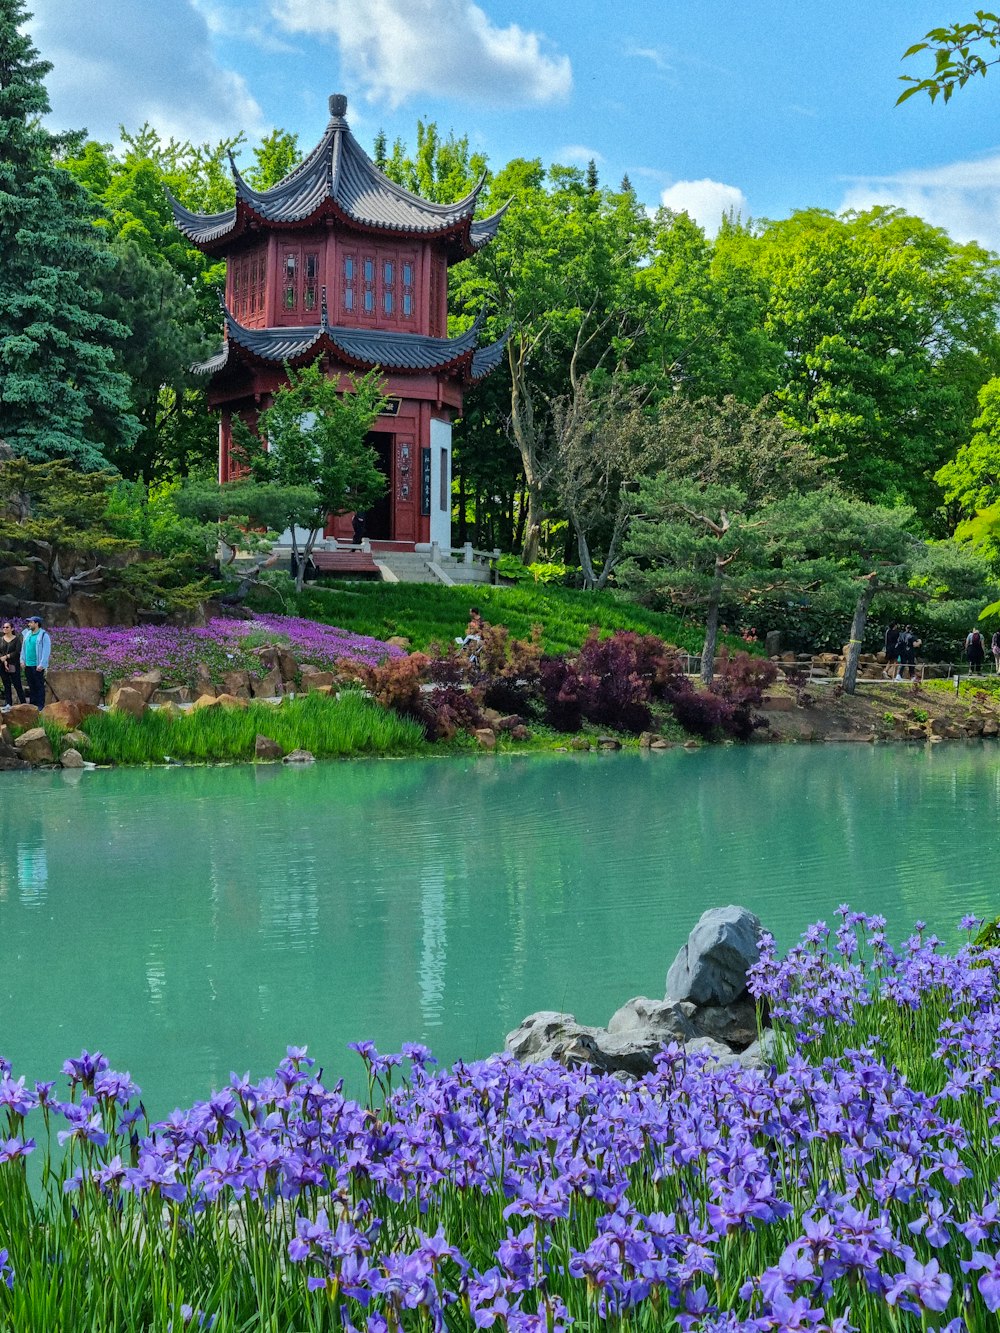 a pond with purple flowers and a pagoda in the background